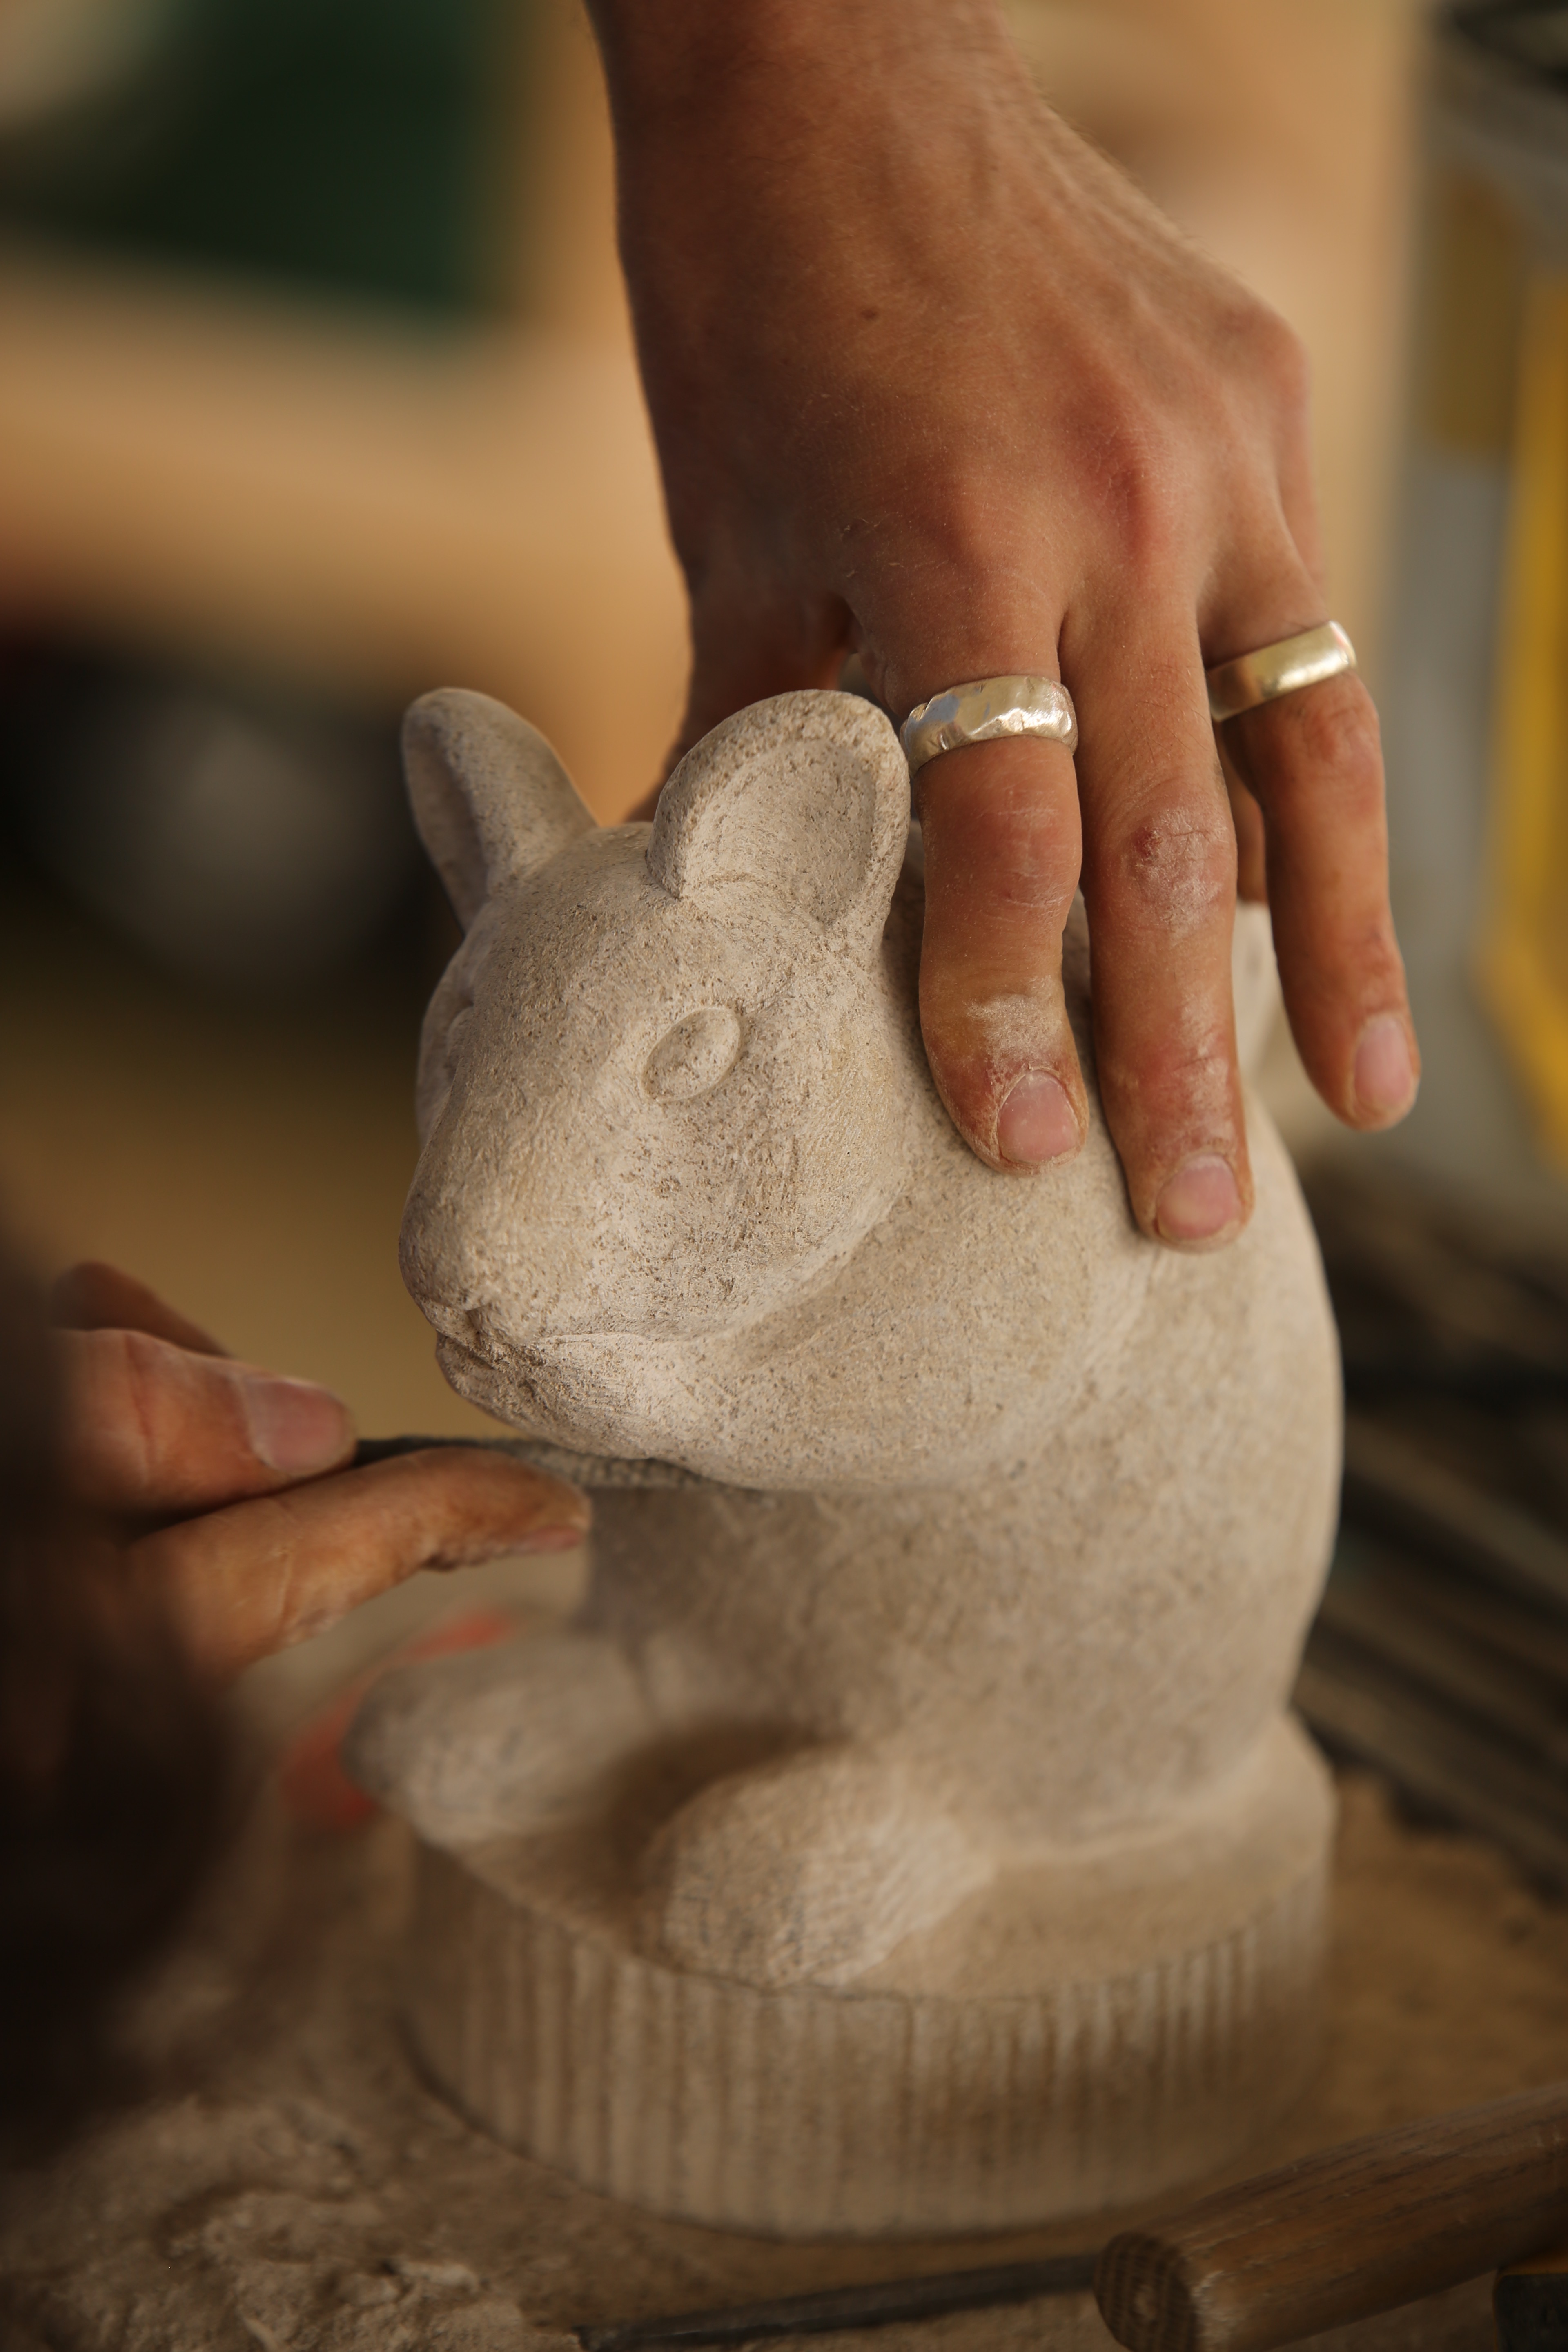 Gallery - Canadian Stone Carving Festival